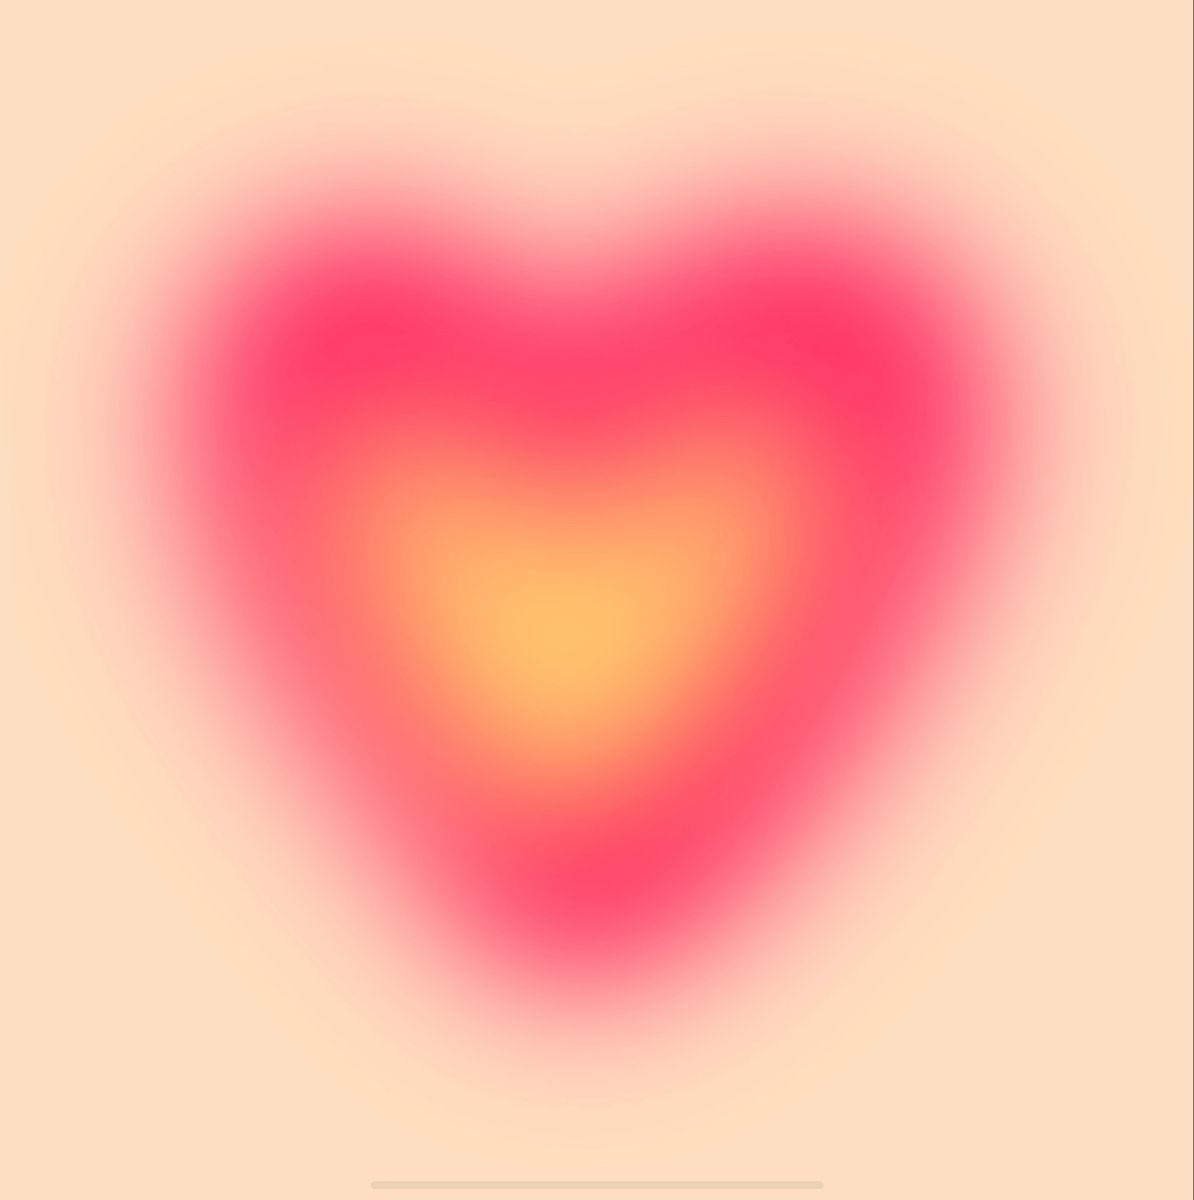 heart aura pfp ＊.｡.:*. Printable wall collage, Aura colors, Aesthetic iphone wallpaper